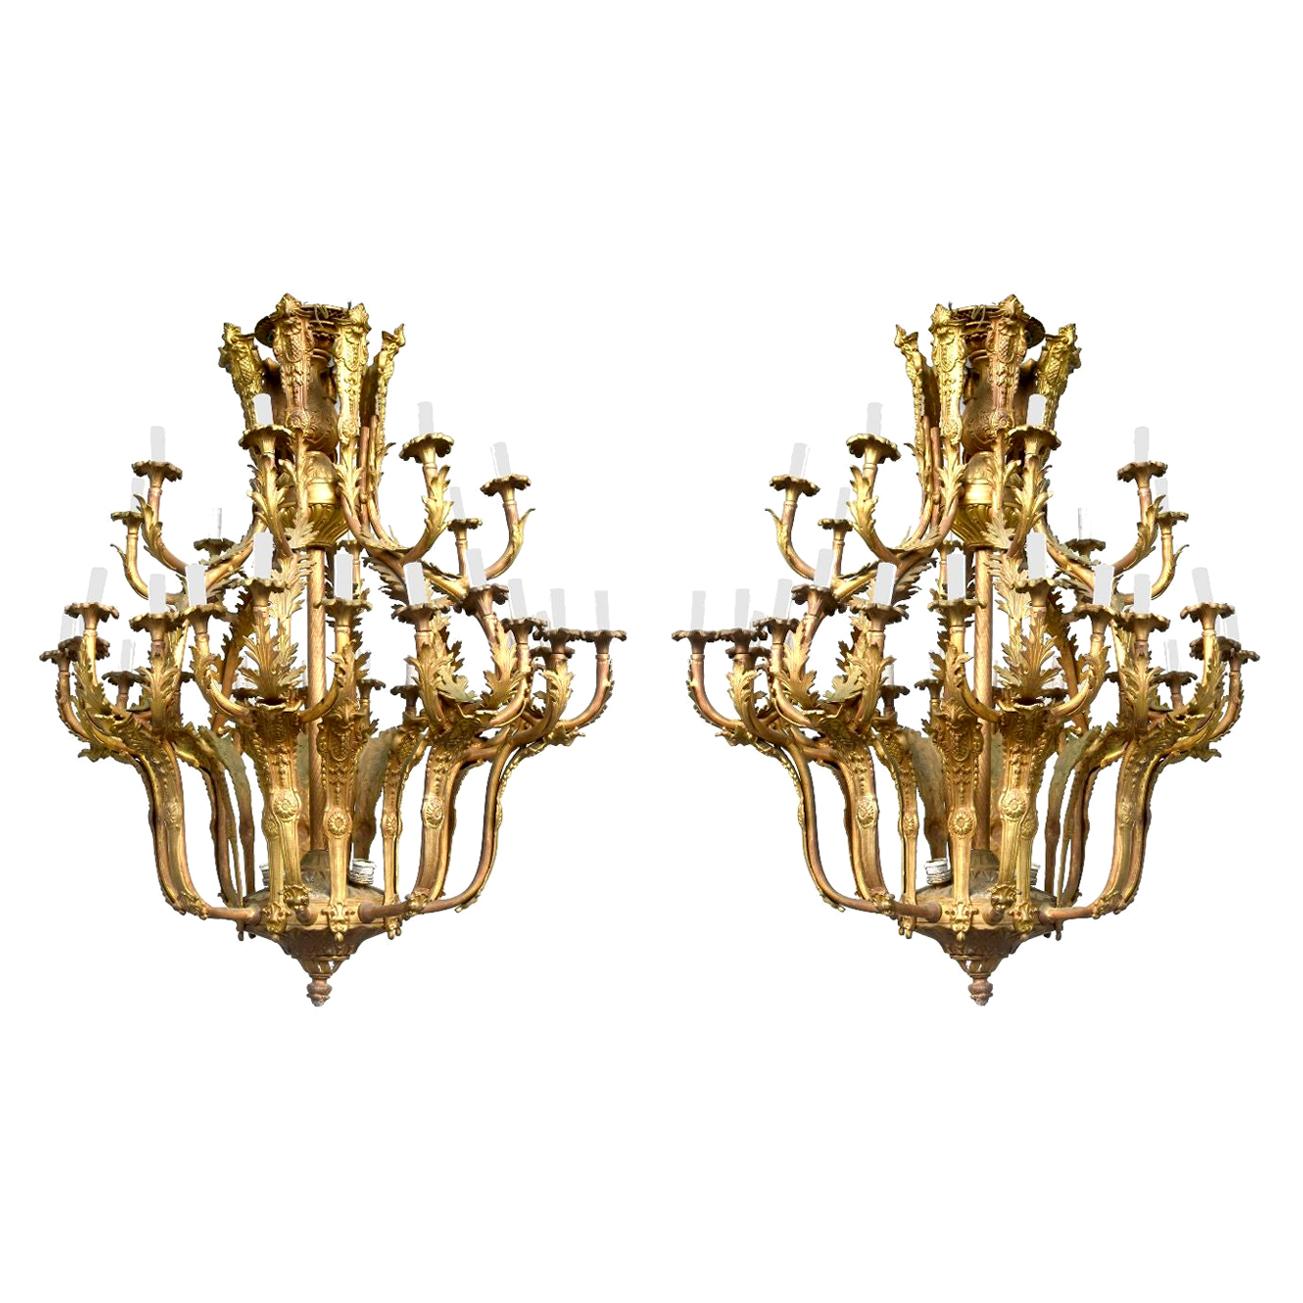 Spectacular Pair of Louis XV Style Chandeliers 36 Lights